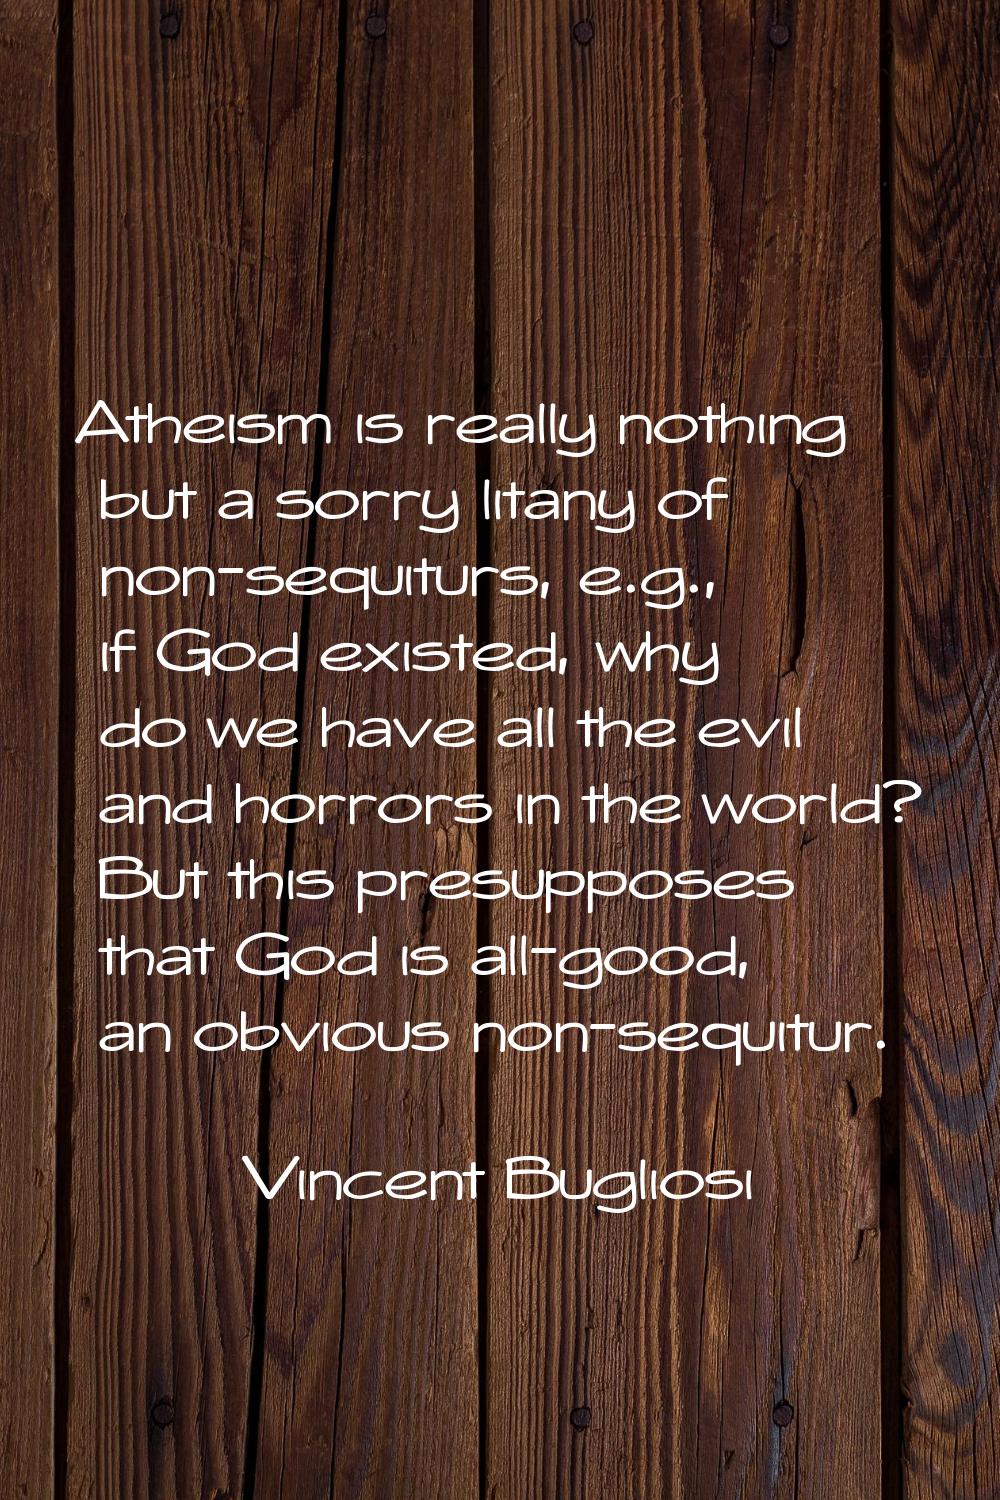 Atheism is really nothing but a sorry litany of non-sequiturs, e.g., if God existed, why do we have